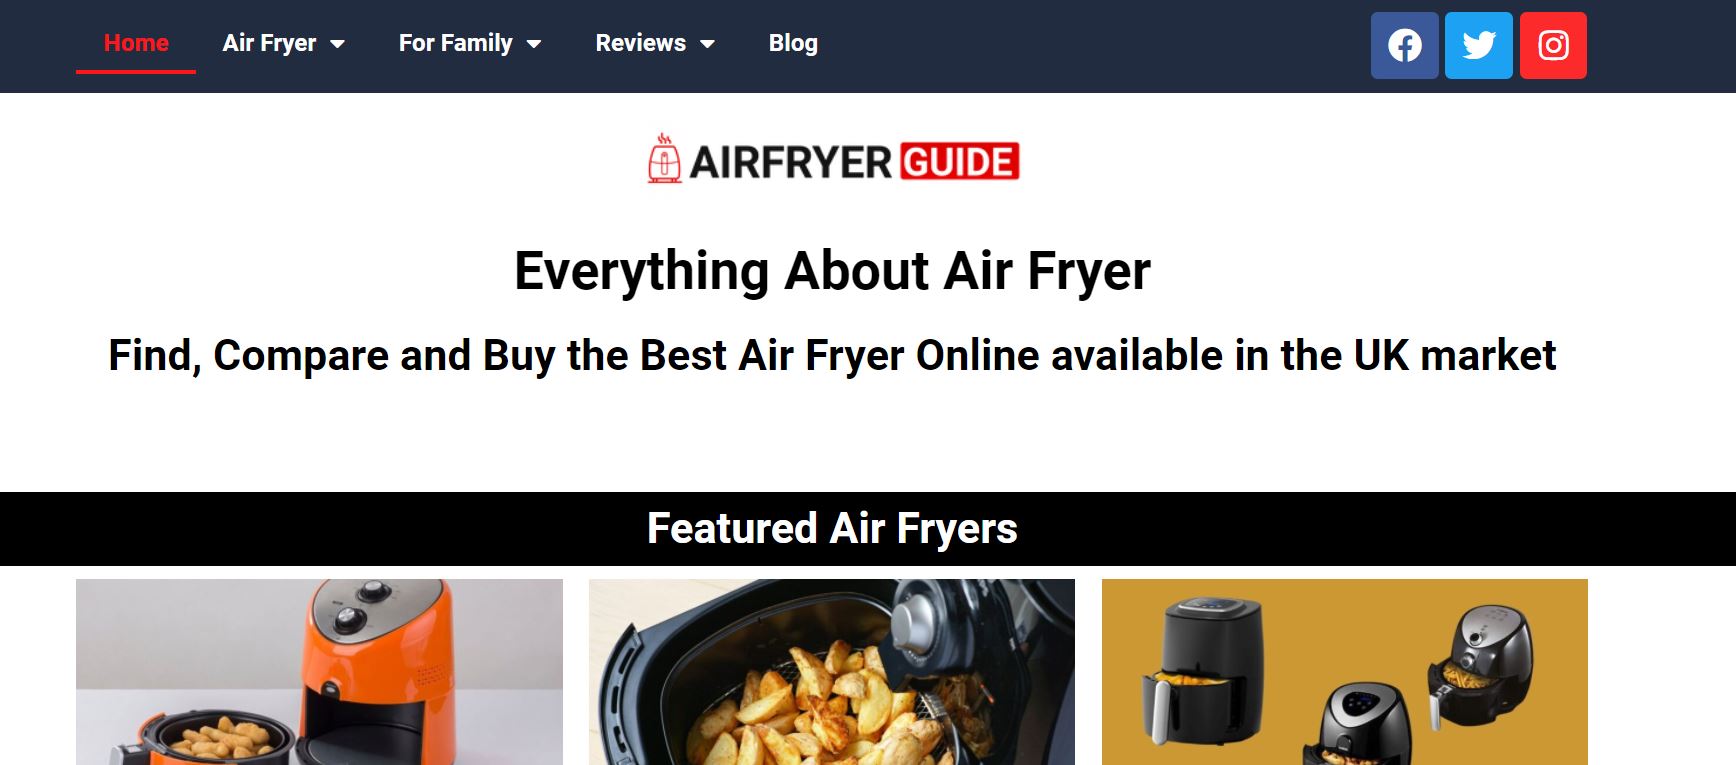 AirFryer Guide